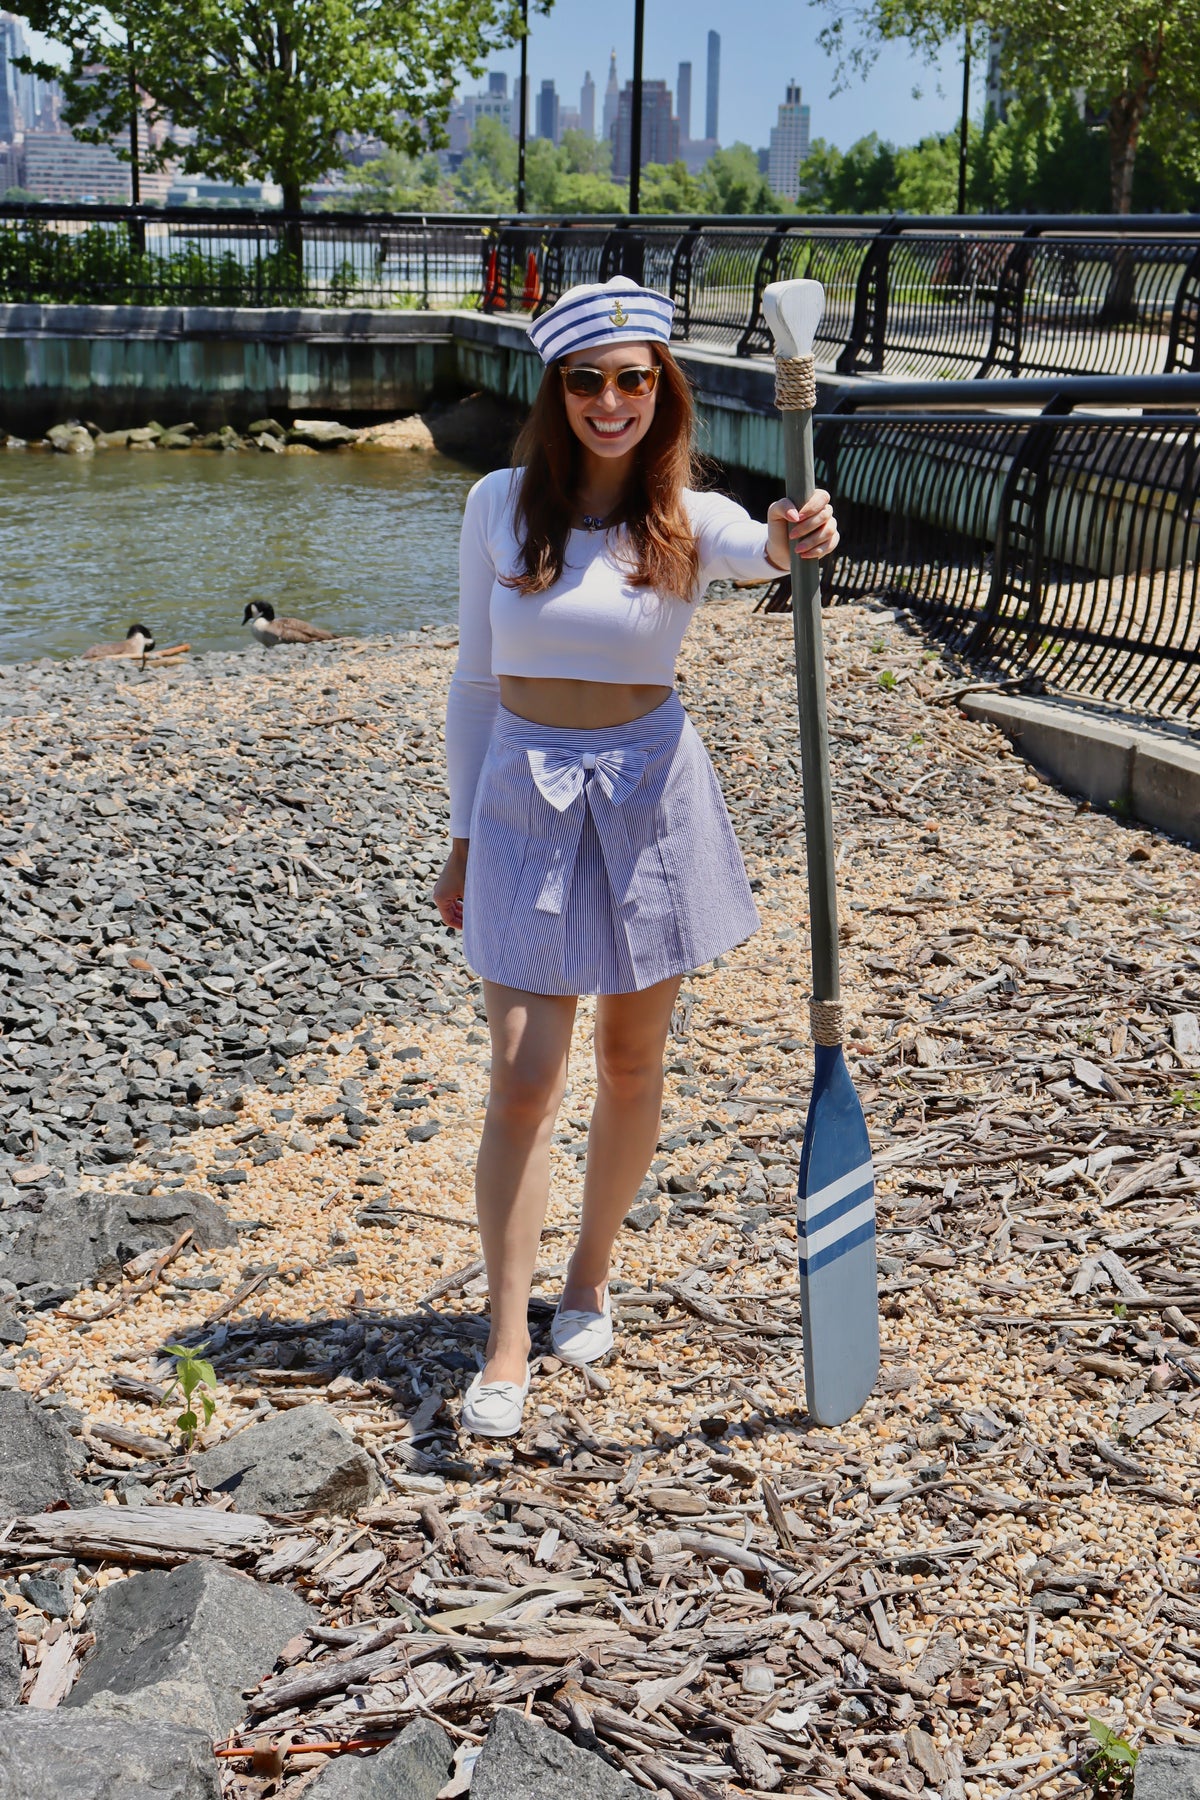 Model wearing a white and blue striped sailing hat, a white long sleeve crop top, and a light blue cotton print skirt with a bow, holding an oar smiling.